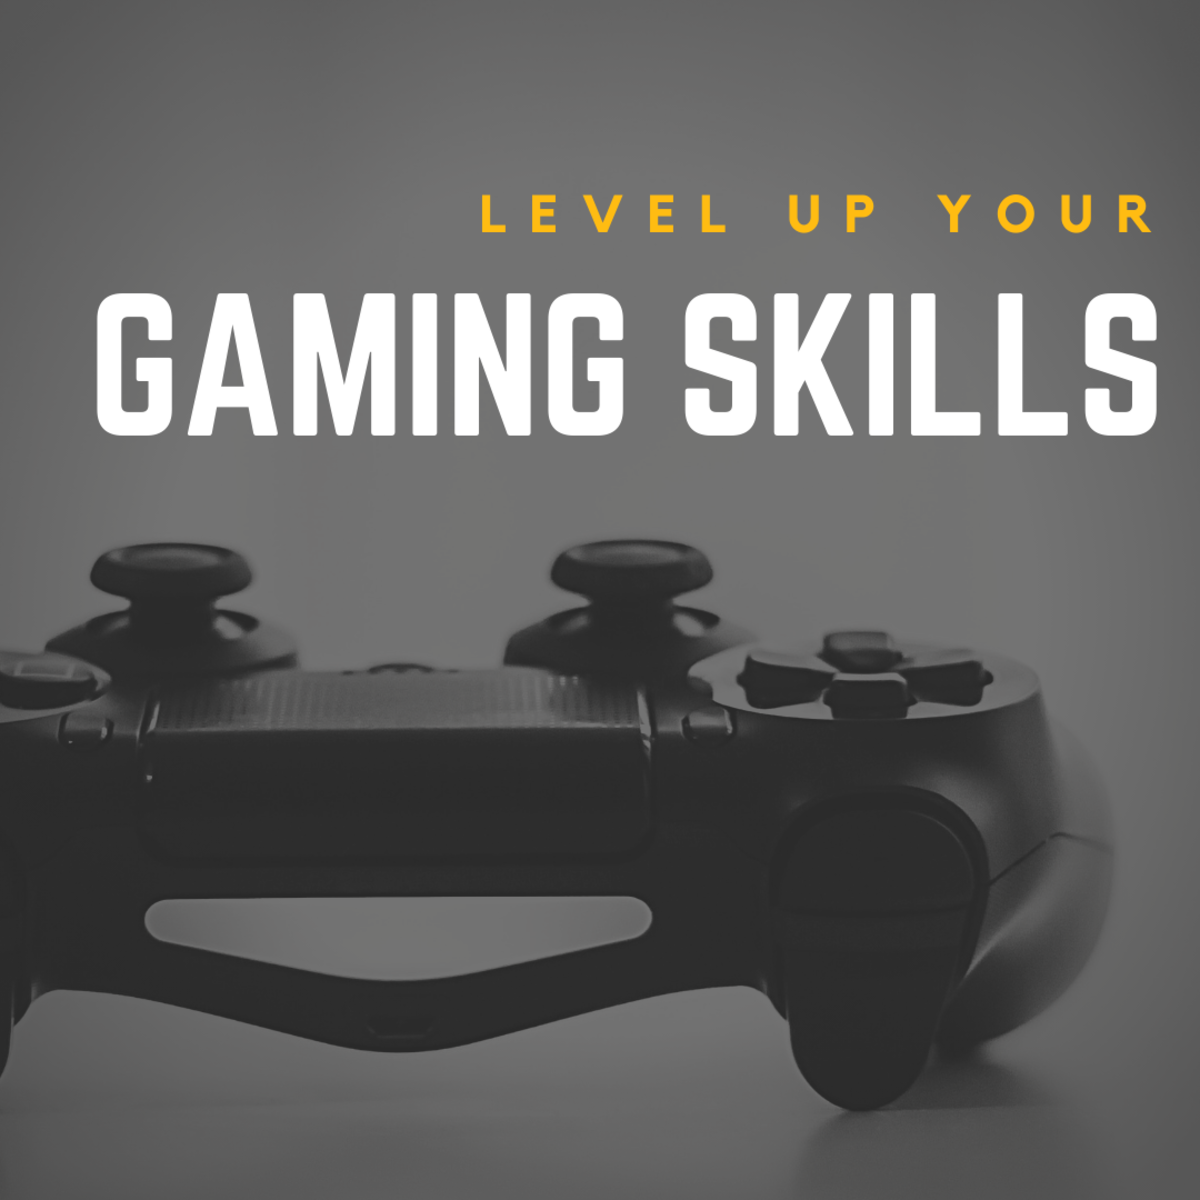 How To Improve At Gaming